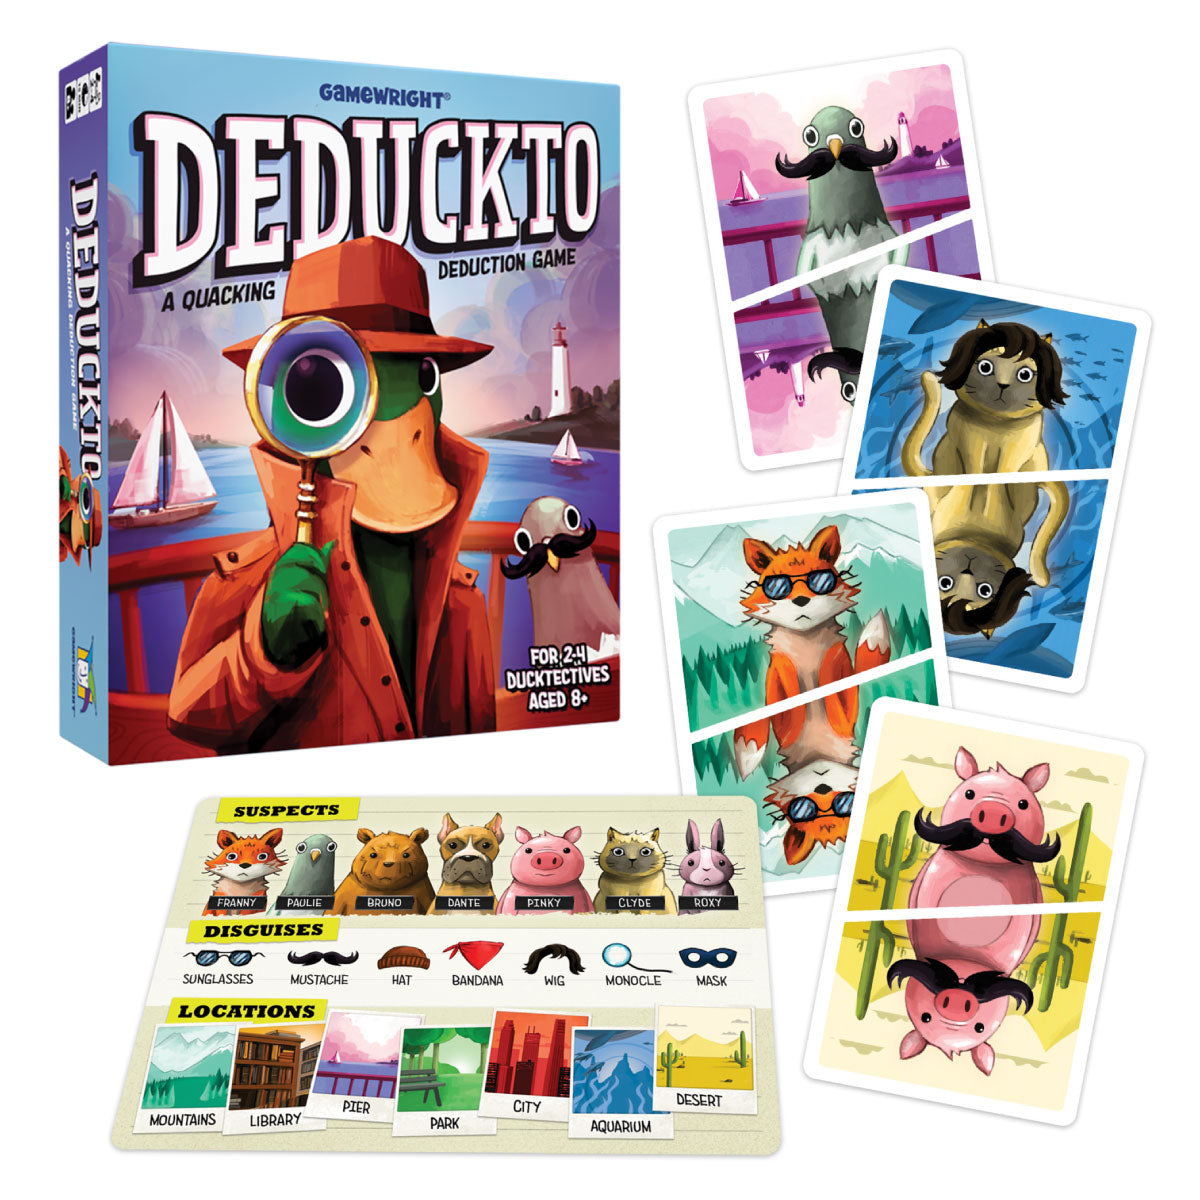 Deduckto deduction game from Gamewright